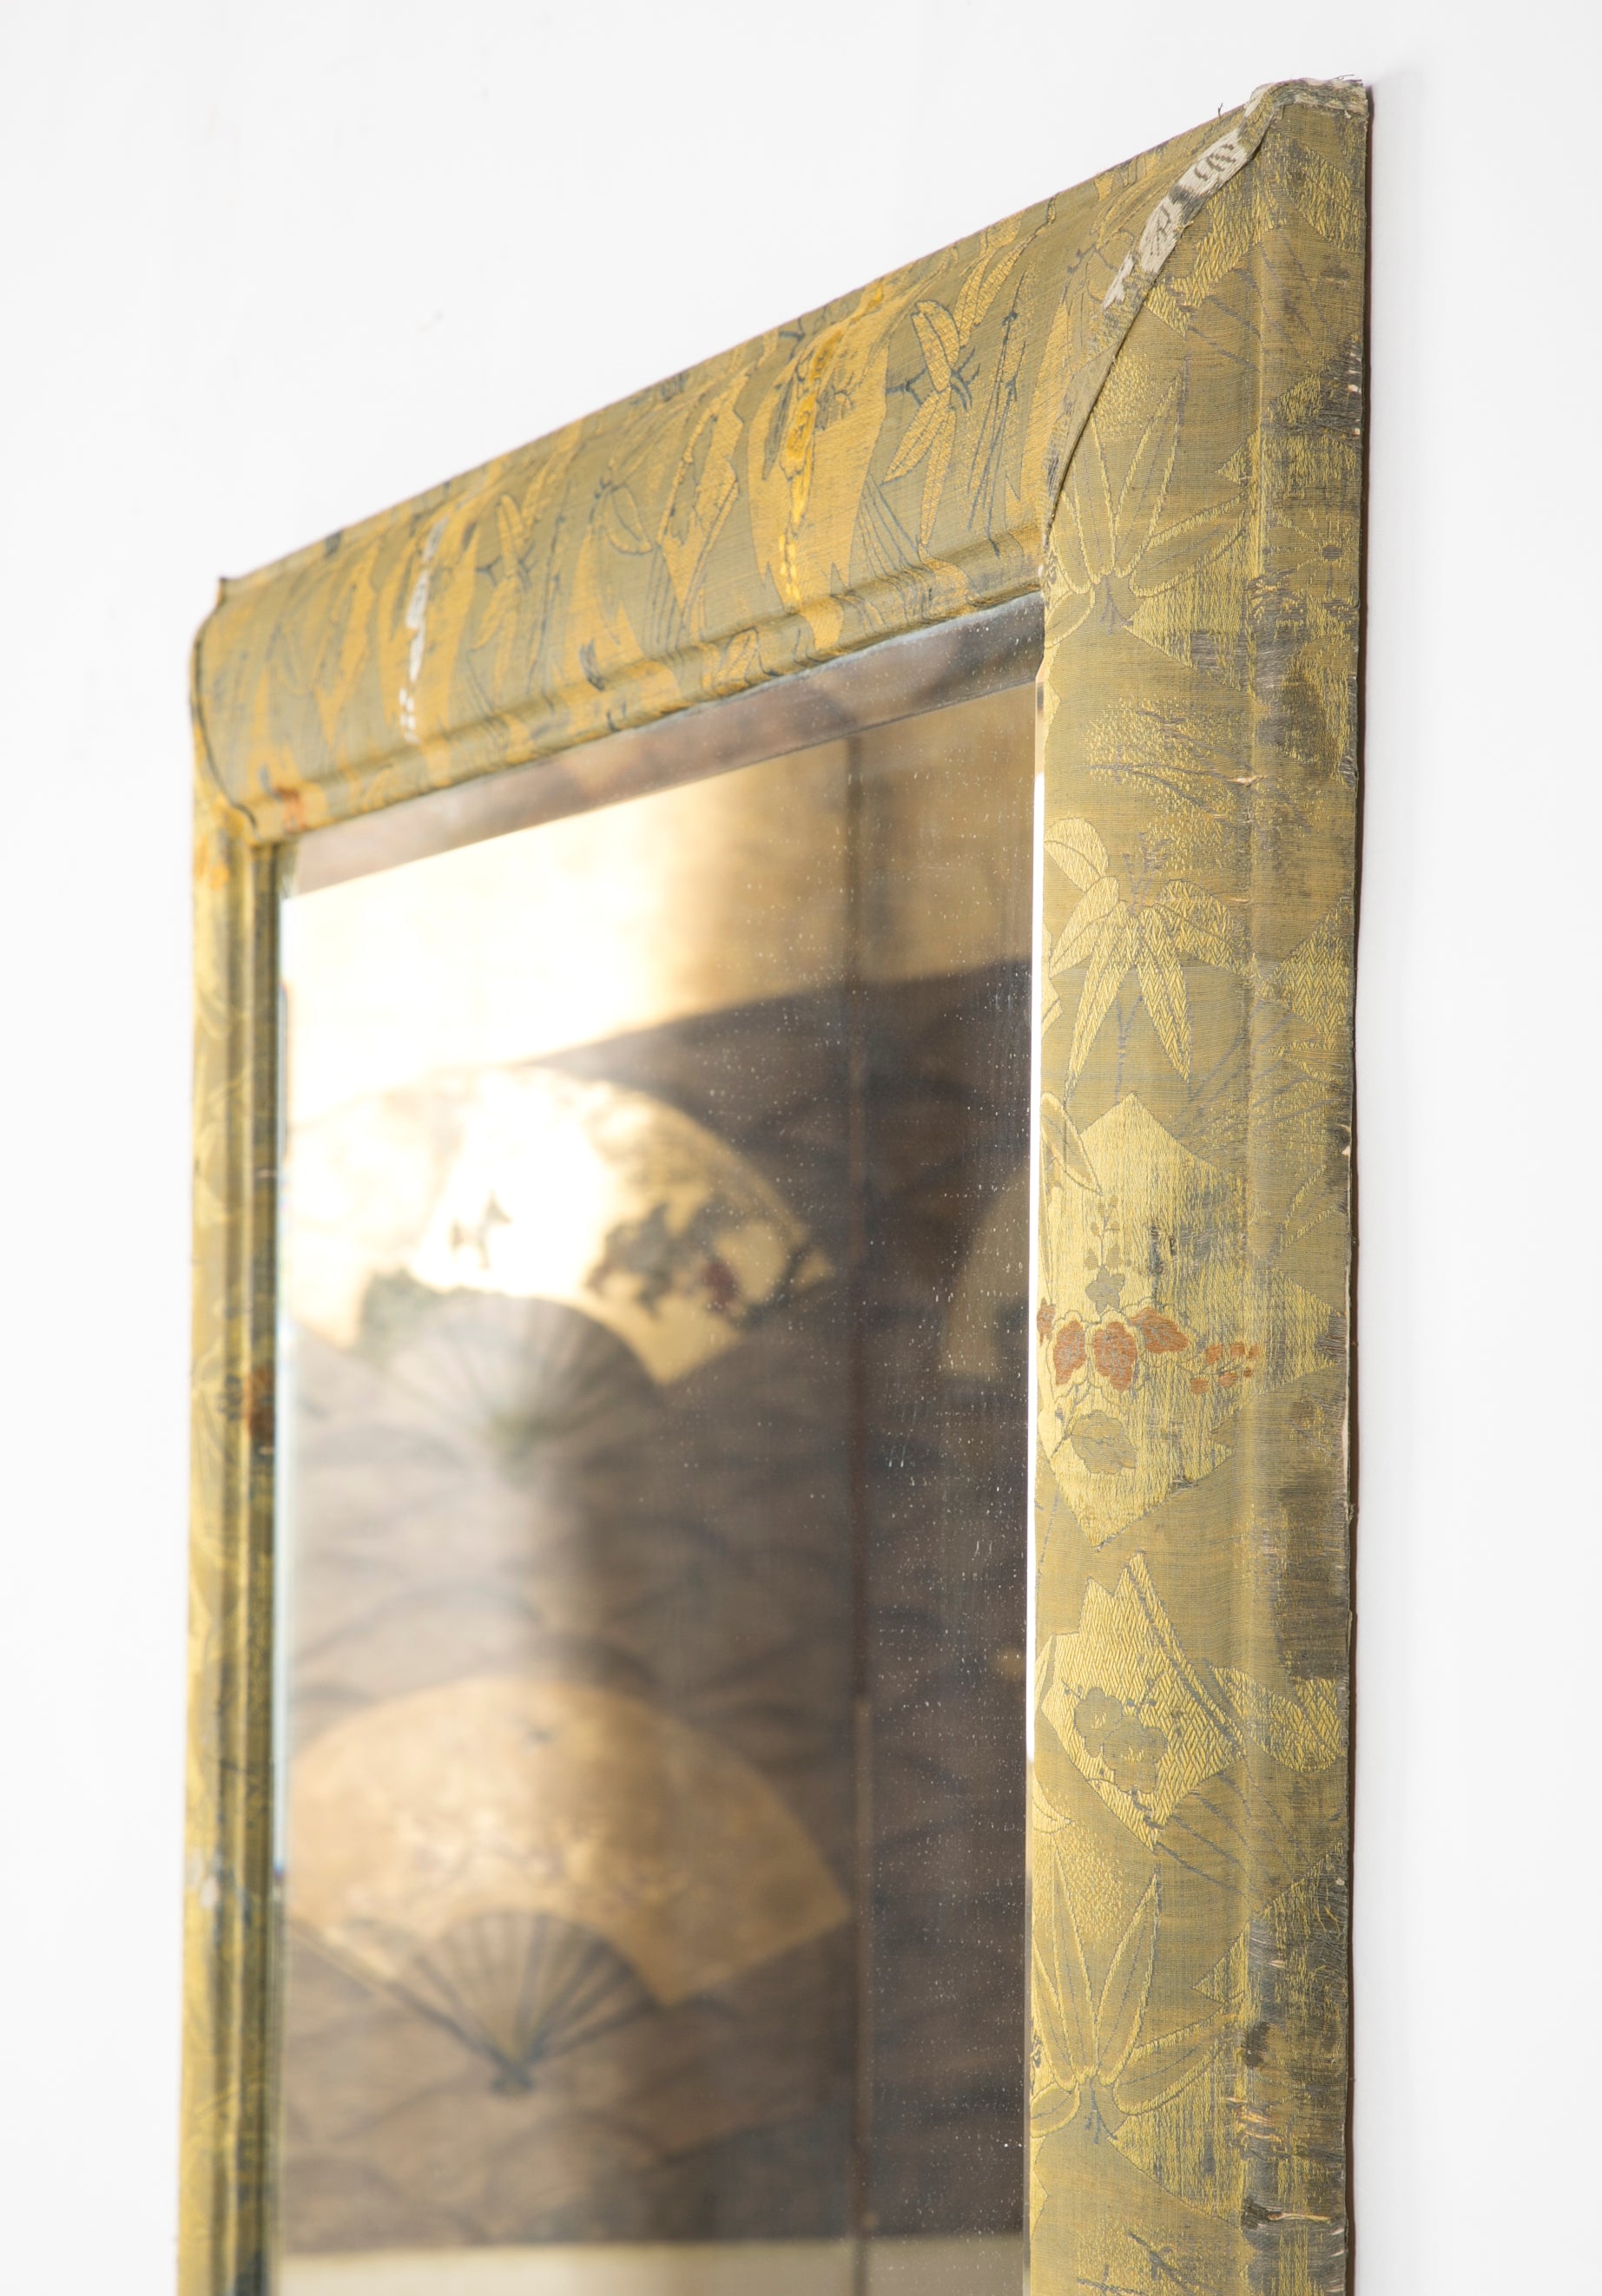 Mirror with a Frame Covered in Japanese Obi Fabric